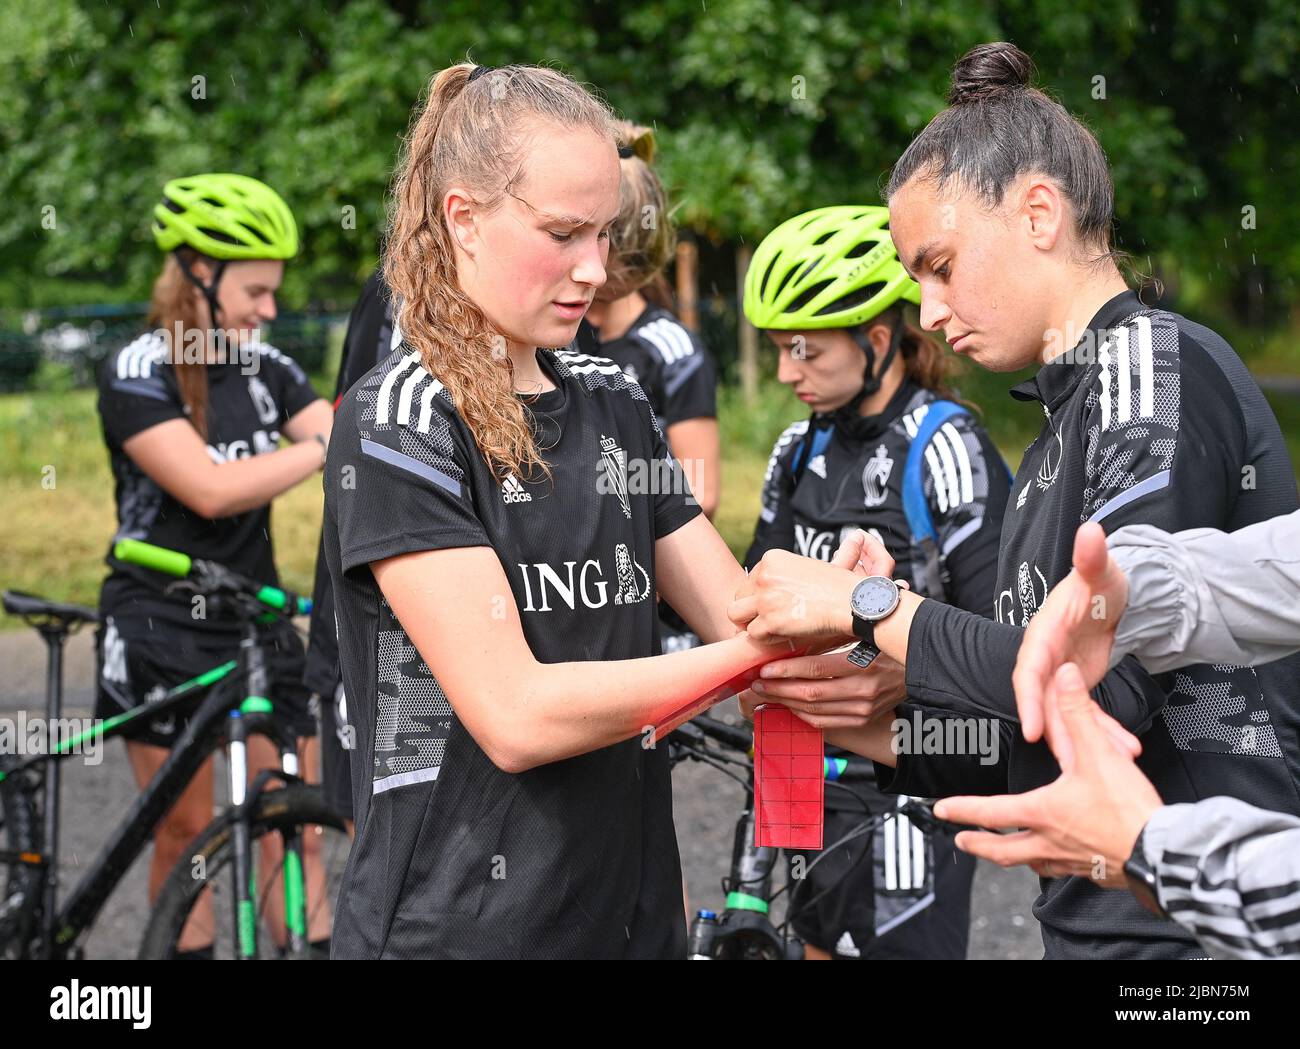 Aywaille. Belguim, 07/06/2022, Belgium's Feli Delacauw and Belgium's goalkeeper Nicky Evrard pictured during a team building activity of the Belgium's national women's soccer team the Red Flames, Tuesday 07 June 2022 in Aywaille. The Red Flames are preparing for the upcoming Women's Euro 2022 European Championships in England. BELGA PHOTO DAVID CATRY Stock Photo